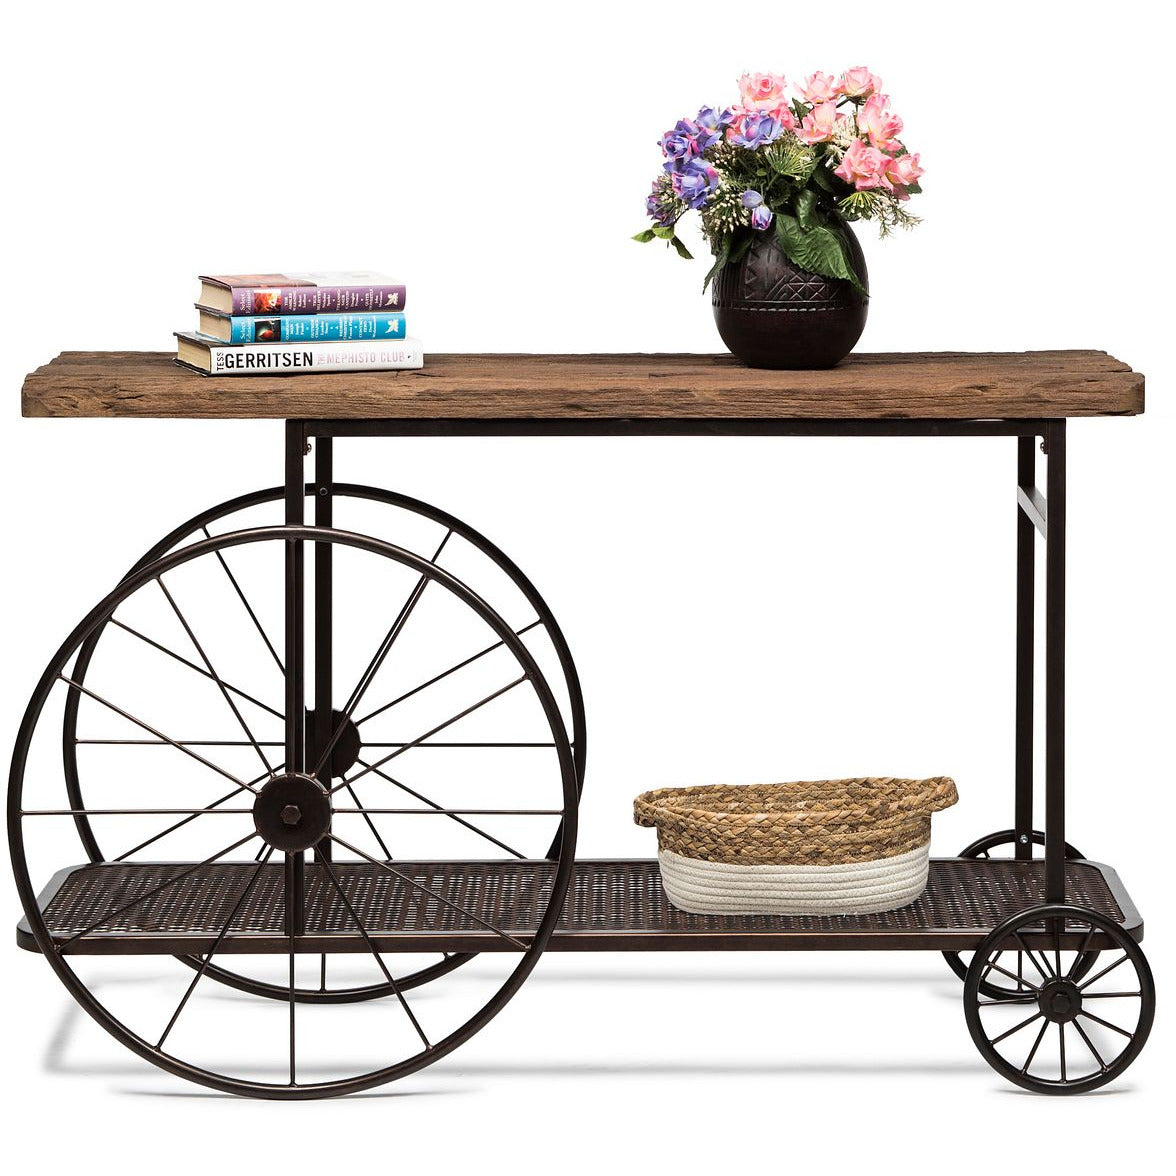 Industrial Style Hallway Console Table with Railway Sleeper Wood Top